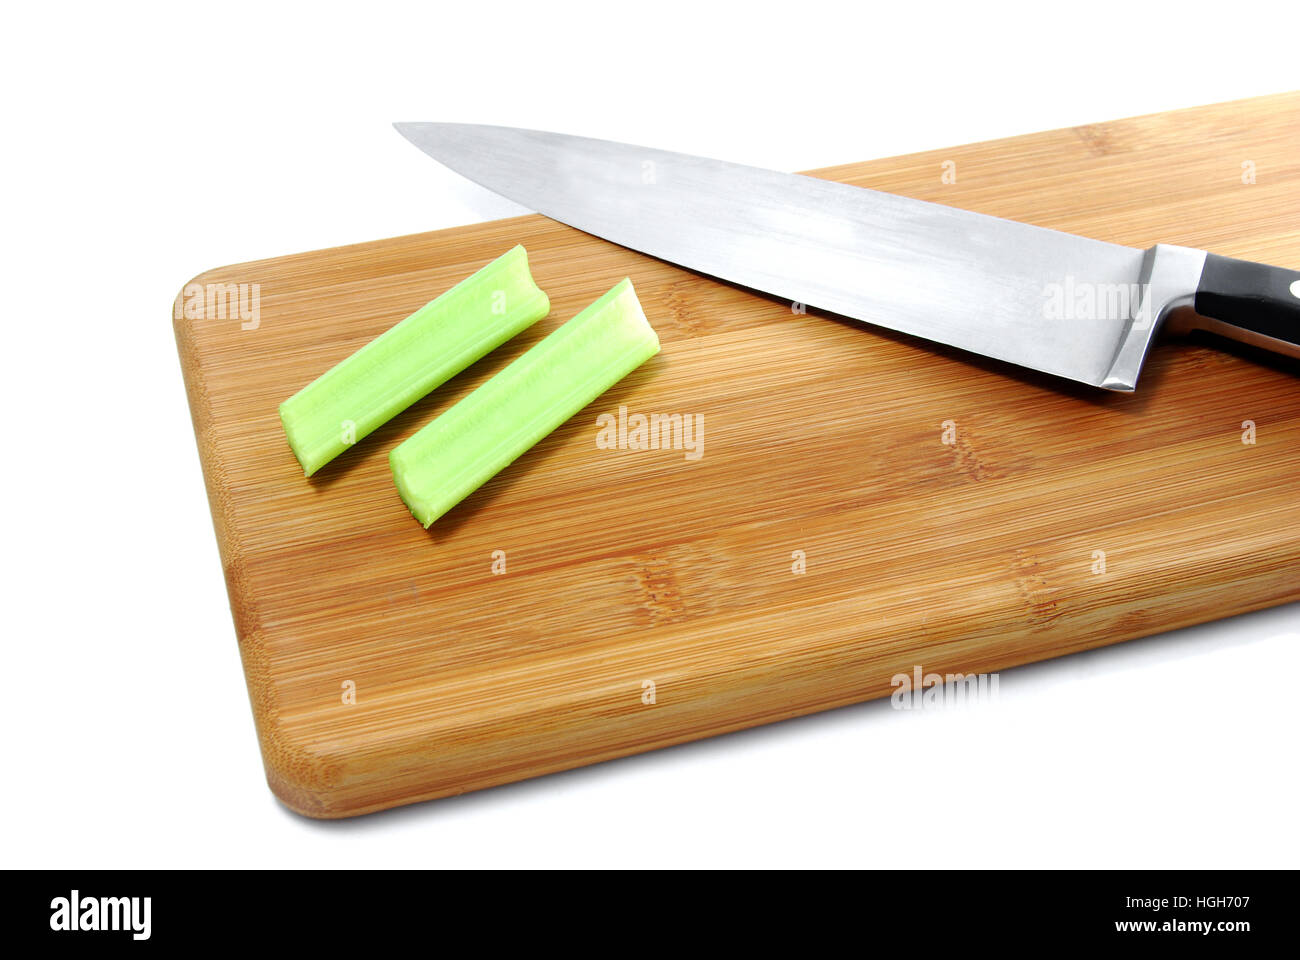 Cutting and preparing celery on cutting board with knife for healthy snack food that is kid friendly. Stock Photo